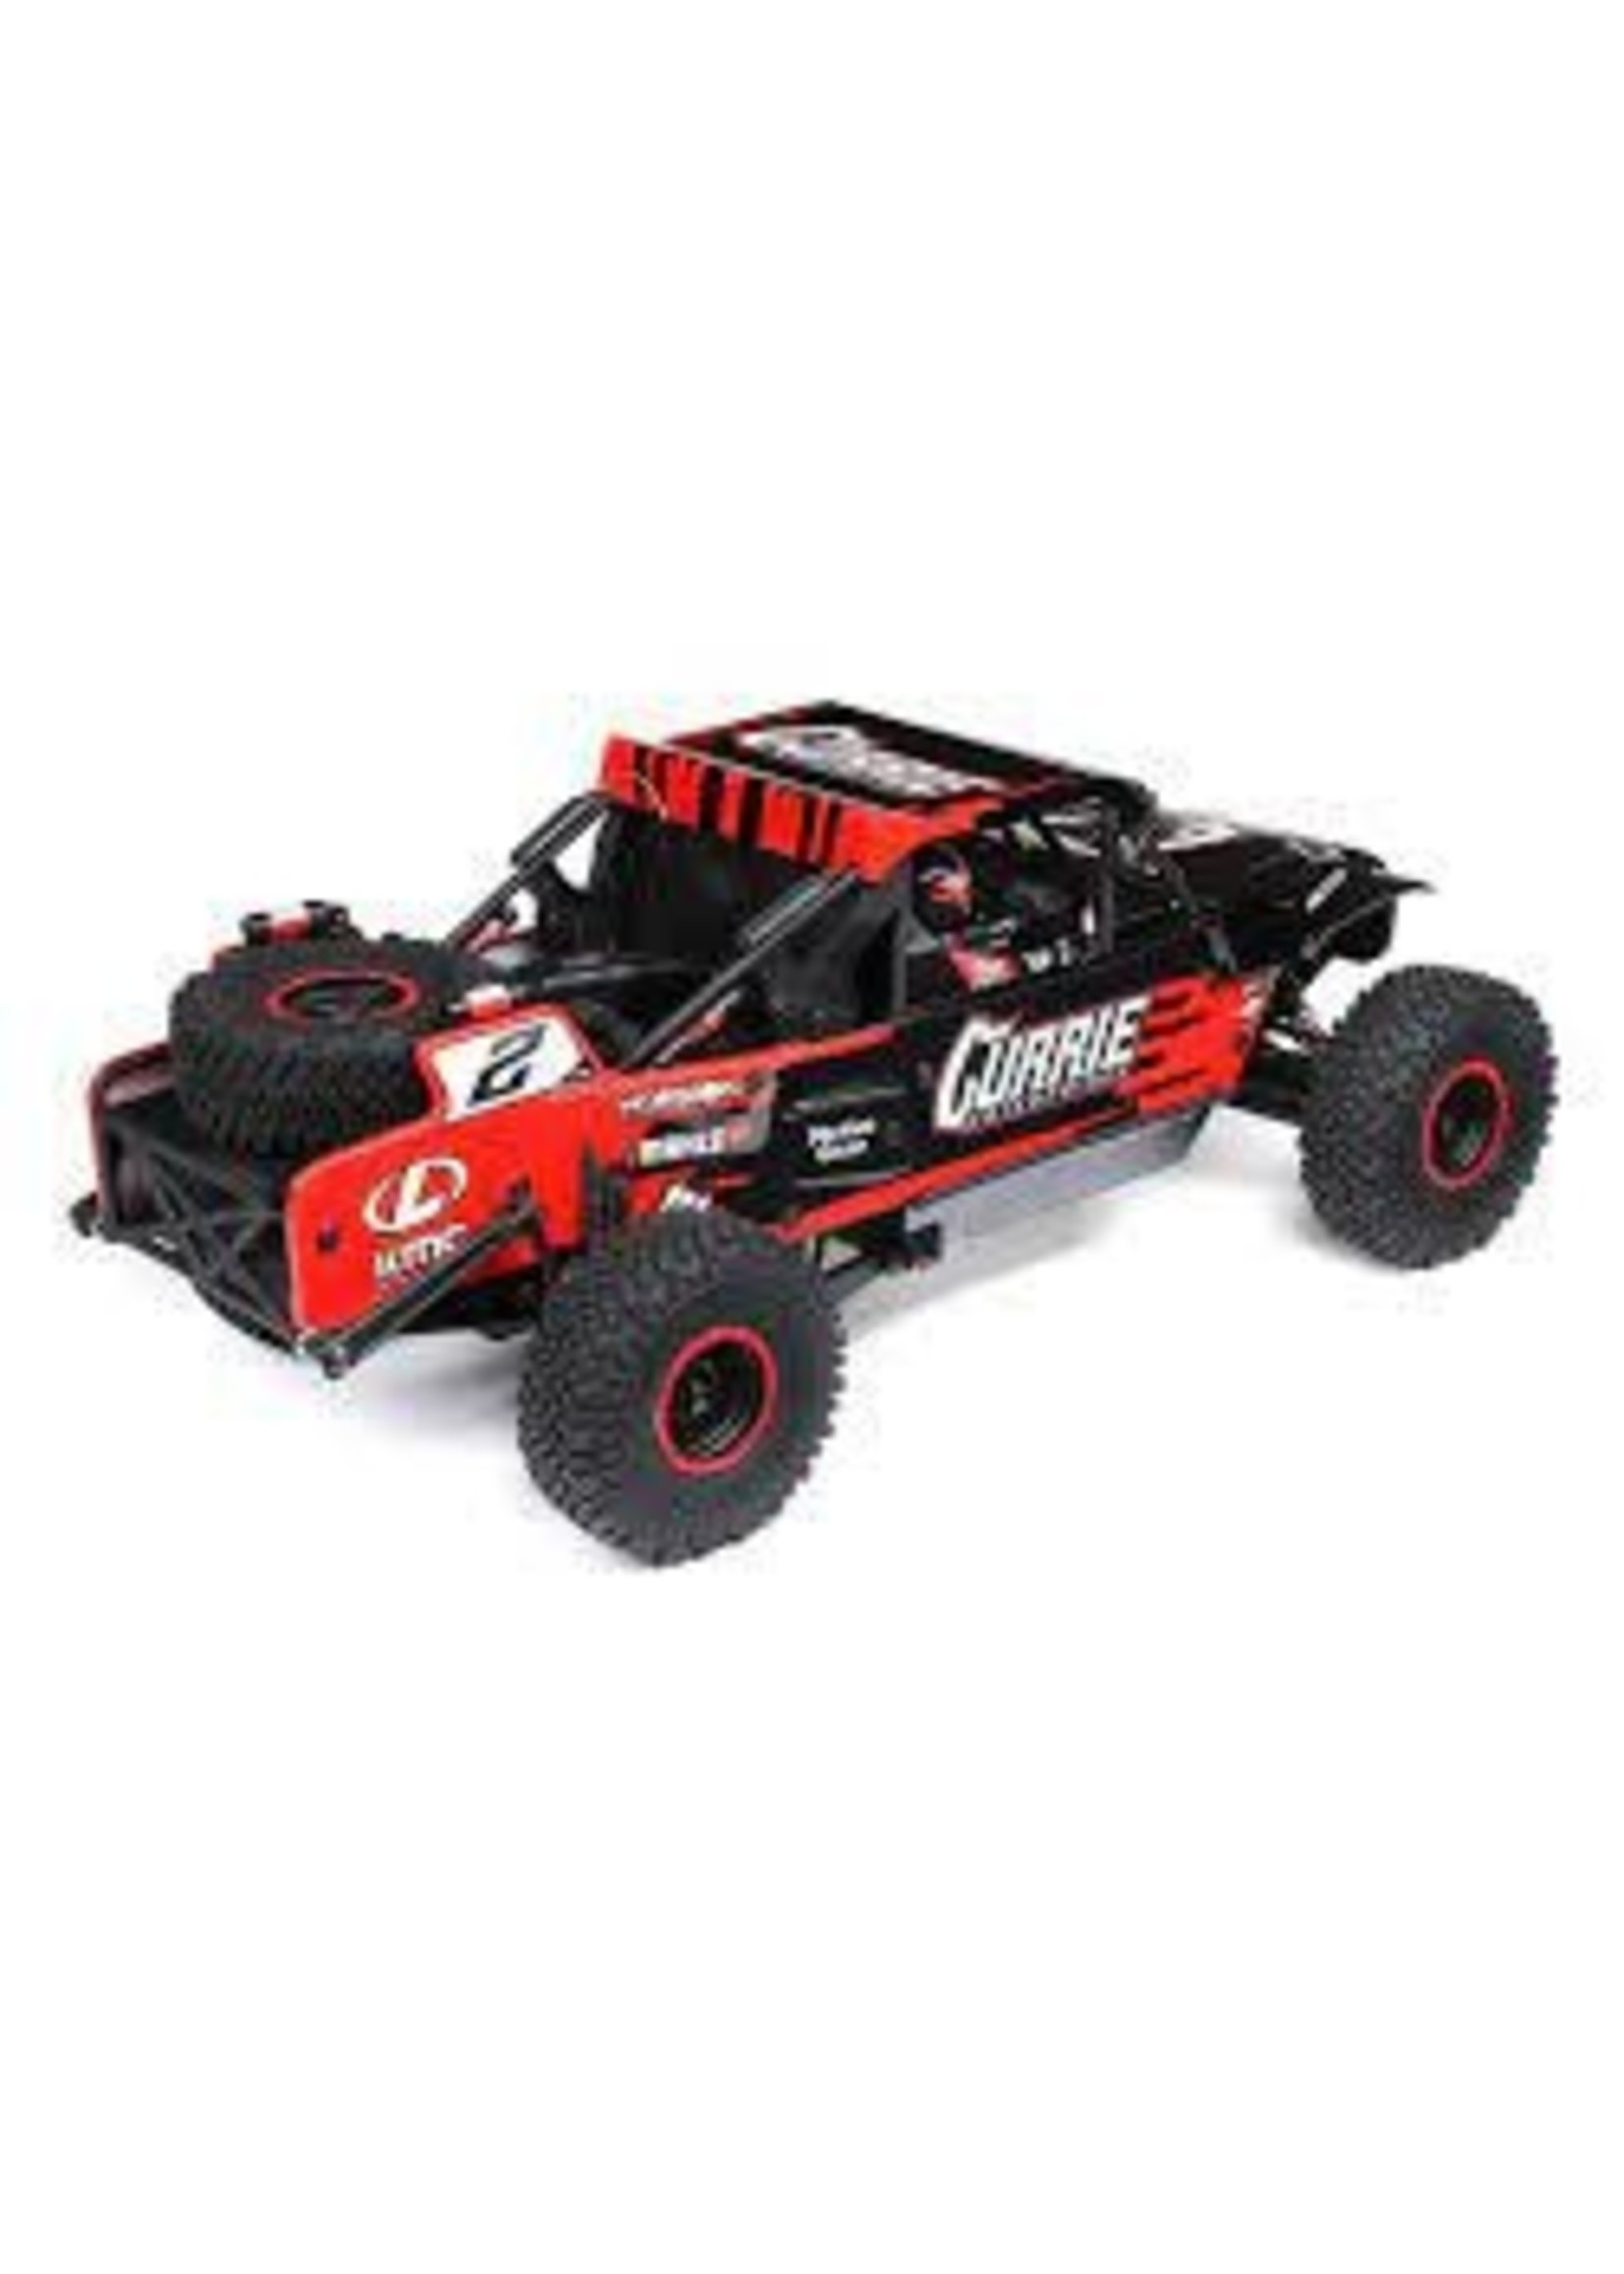 Losi LOS03030T1 Losi Hammer Rey U4 1/10 RTR 4WD Brushless Rock Racer Truck (Red) w/2.4GHz Radio, AVC & SMART